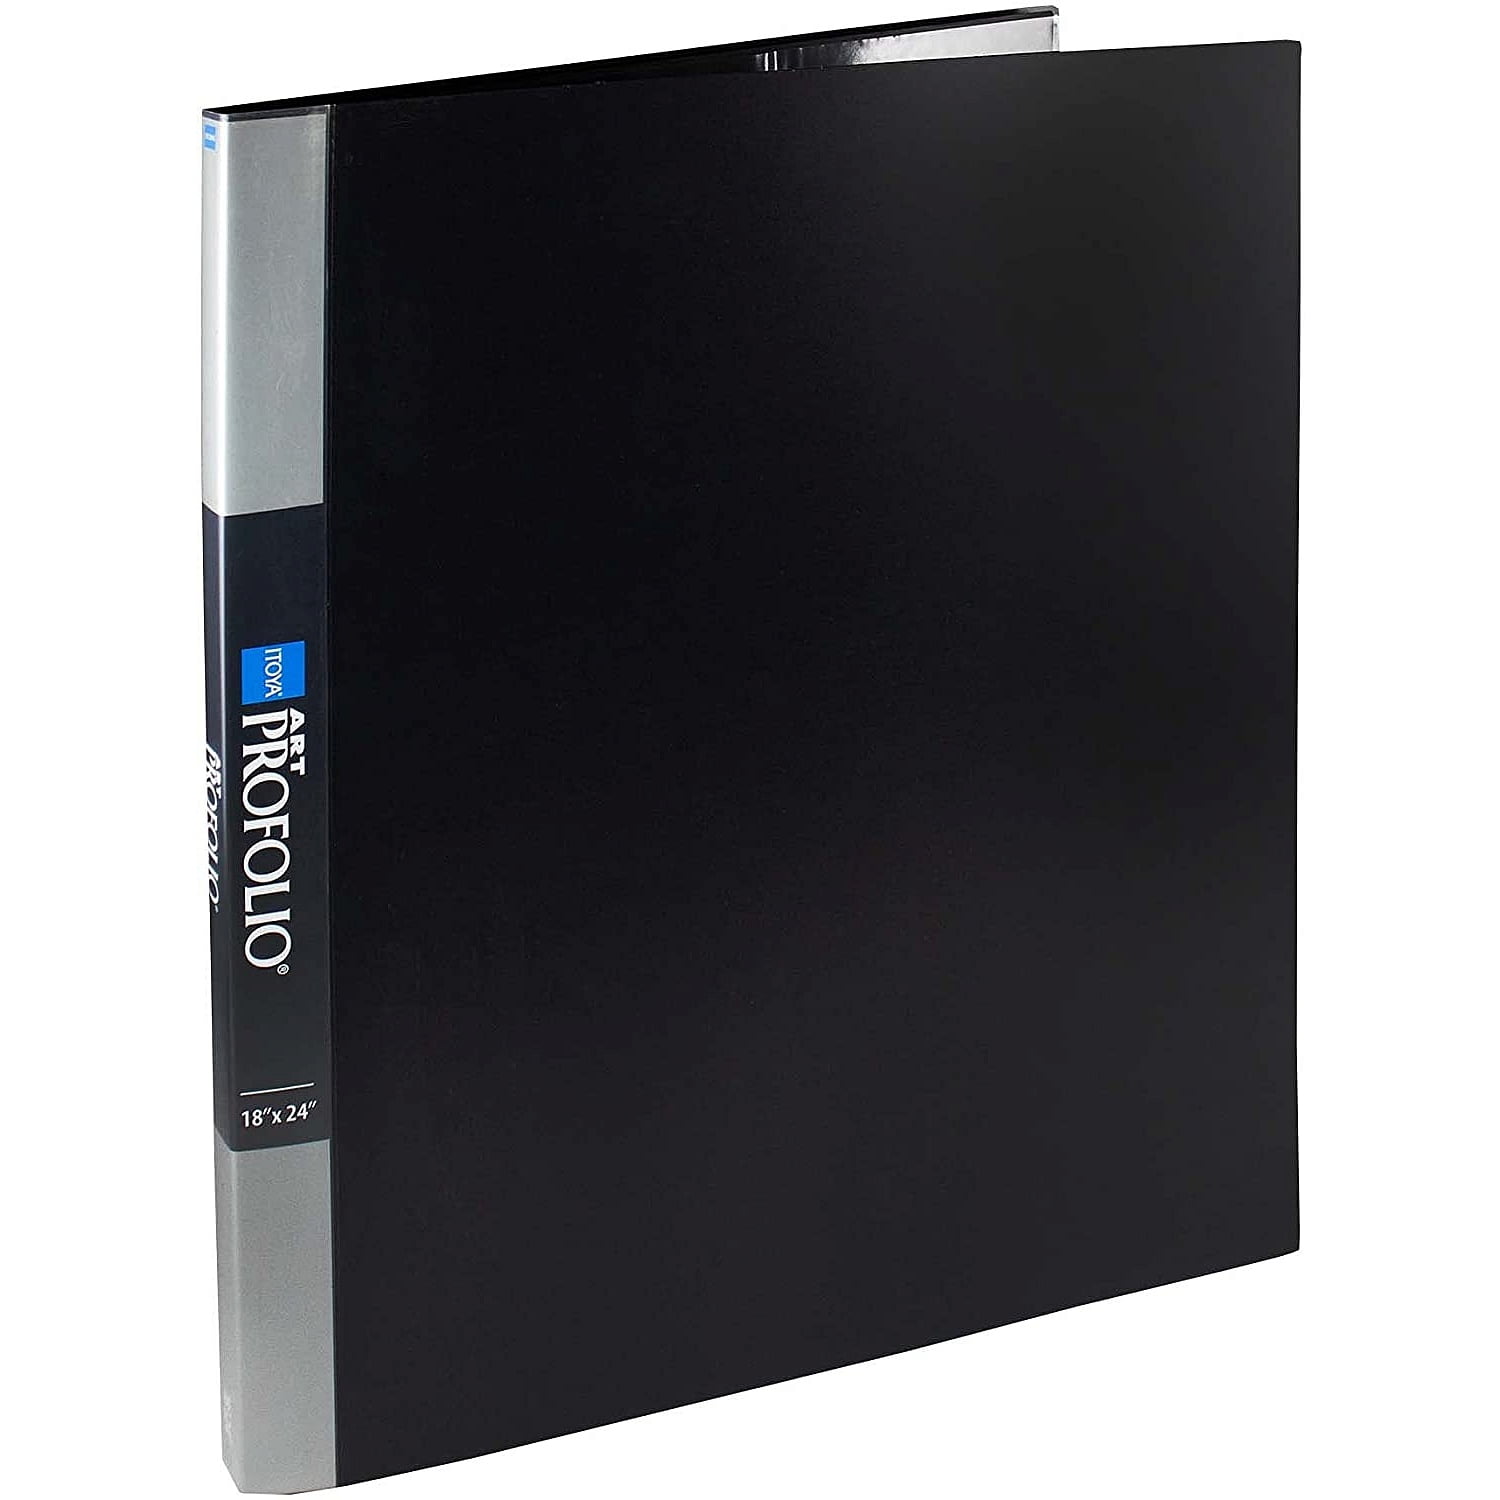 Itoya ProFolio PolyGlass Pages (Portrait, 18 x 24, 10 Pages)